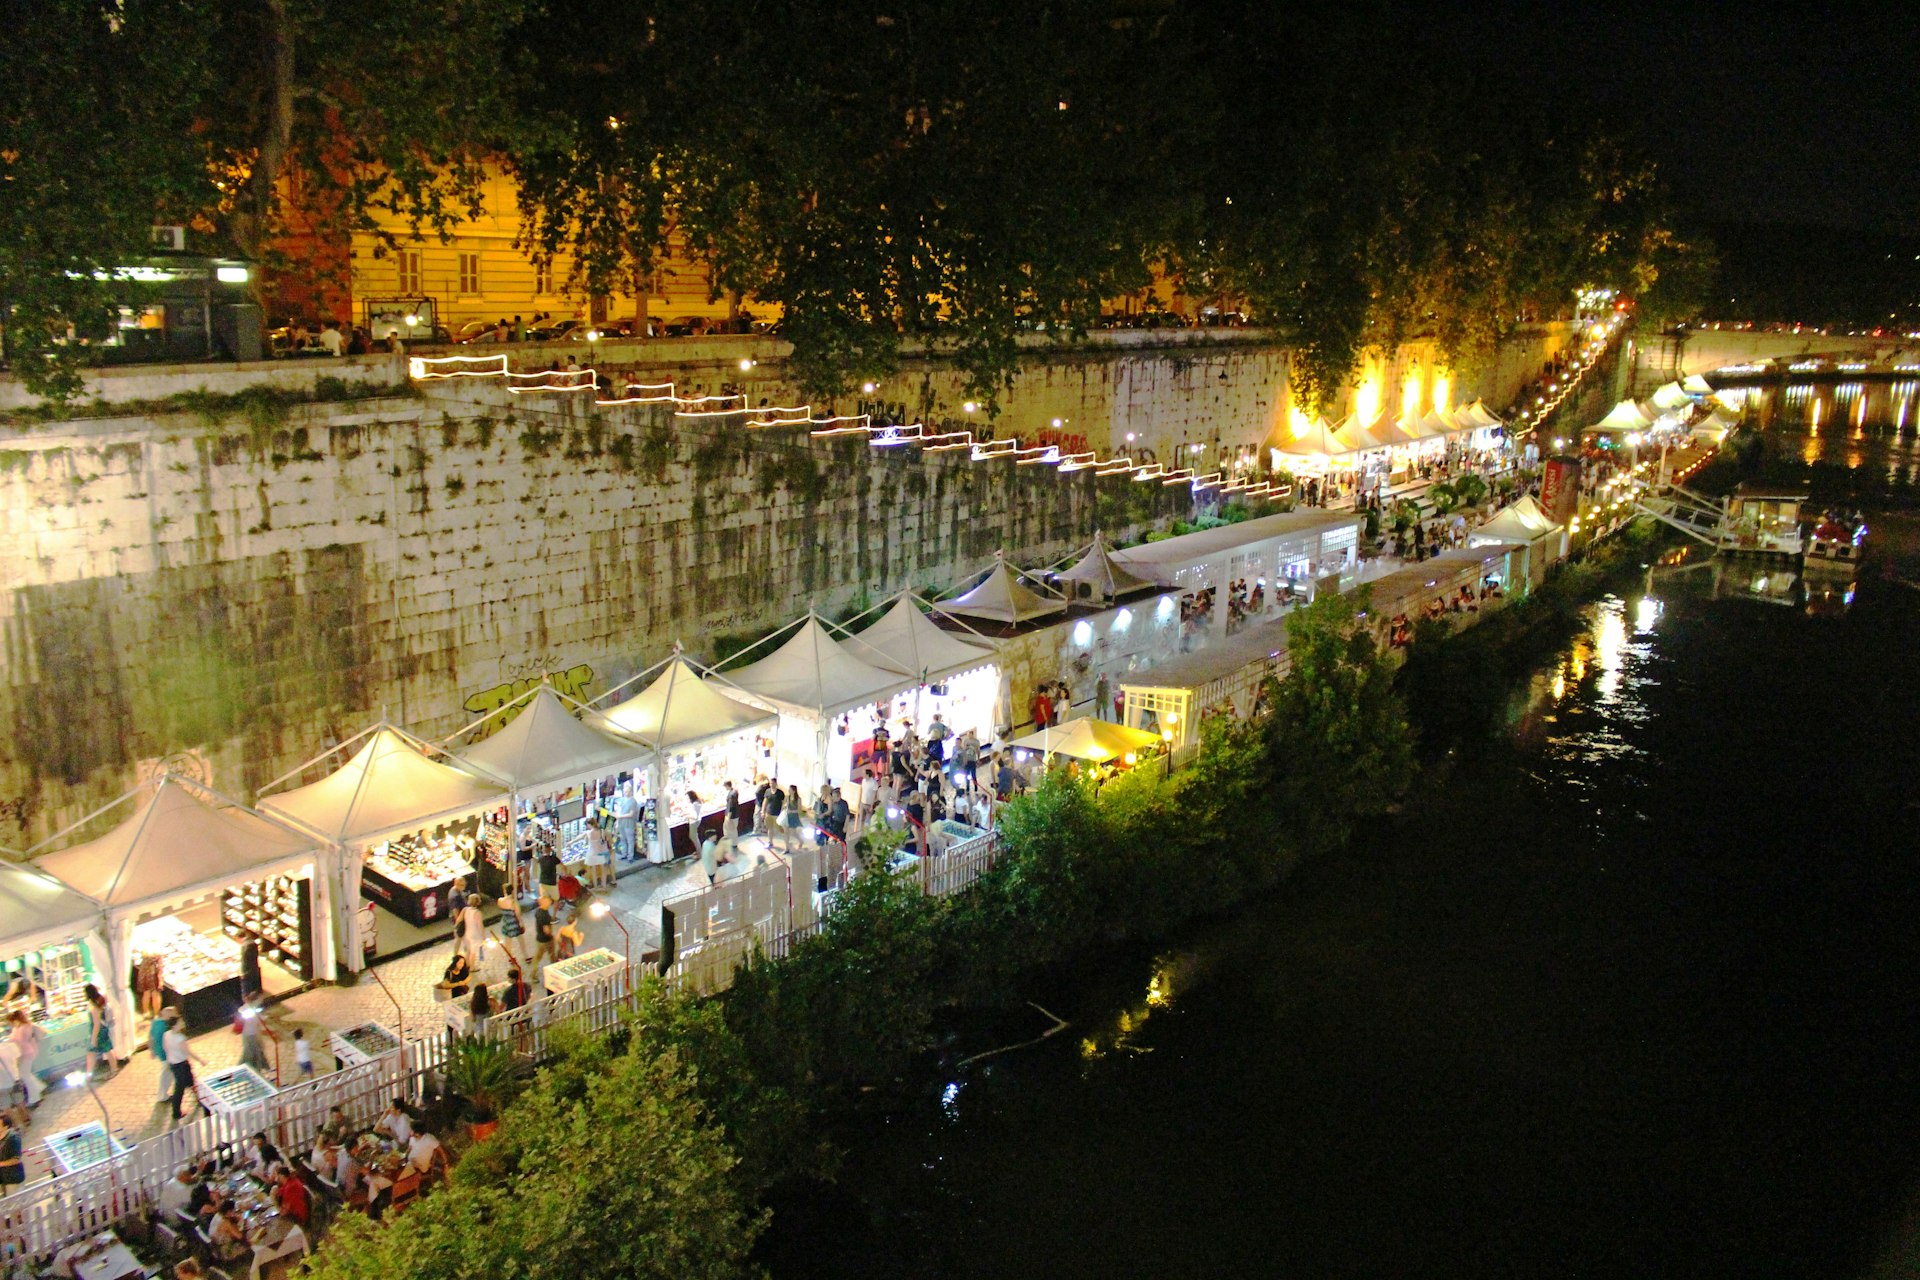 Lungo il Tevere Festival along the banks of the Tiber River in Rome